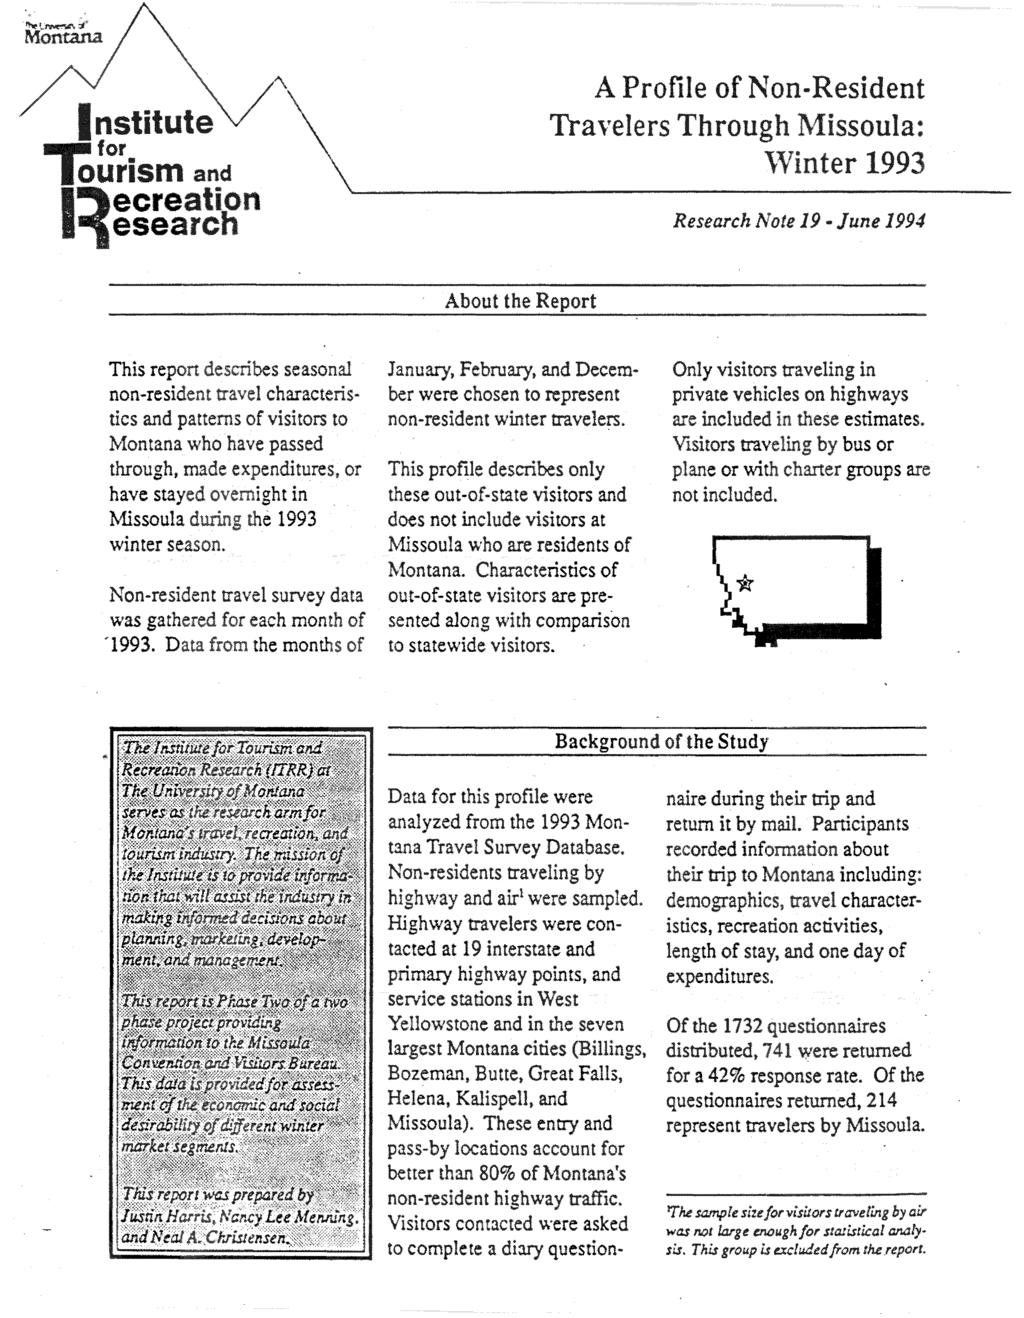 Montana Institute v f o t l o u r l s m and lecreatlpn lesearch A Profile of Non-Resident Travelers Through ; Winter 1993 Research Note 19 - June 1994 About the Report This report describes seasonal